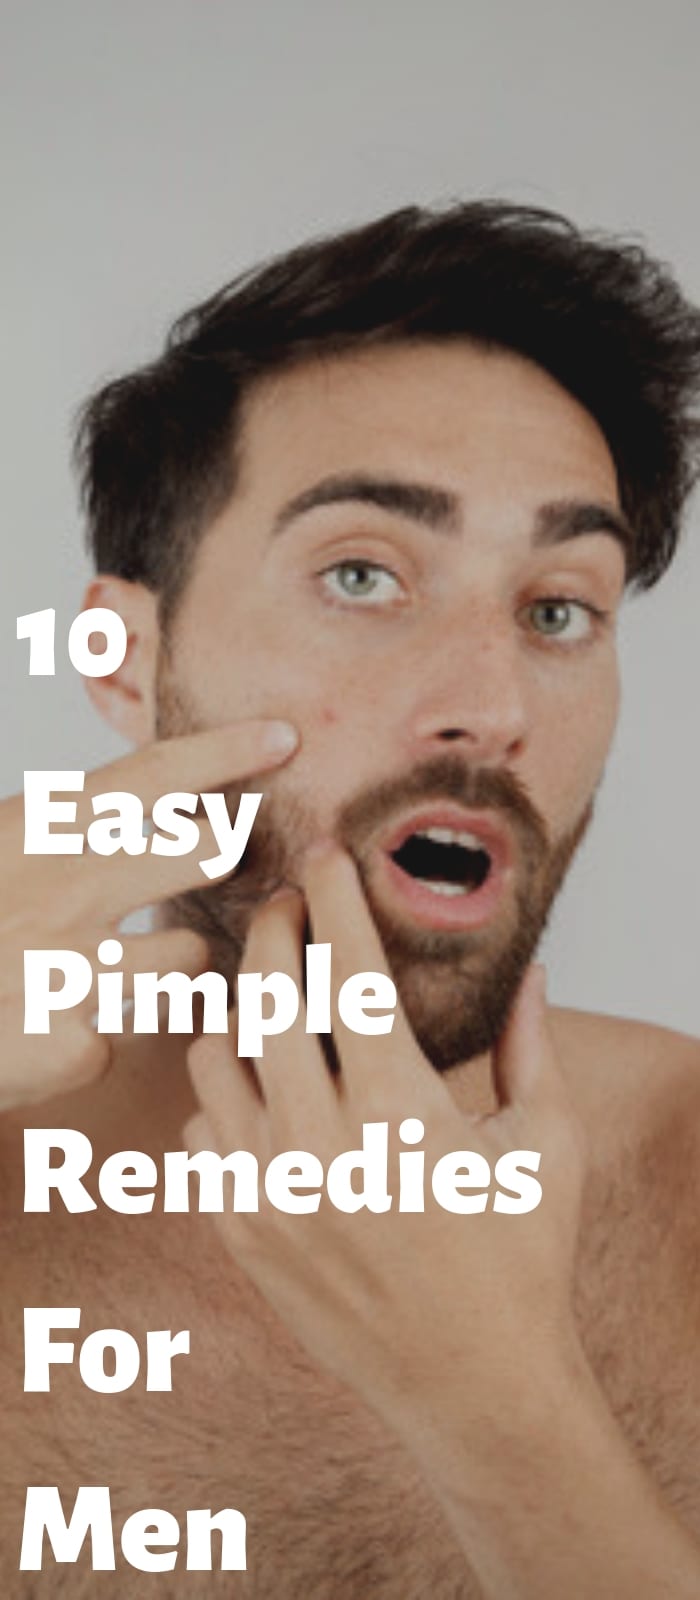 10 Easy Pimple Remedies For Men